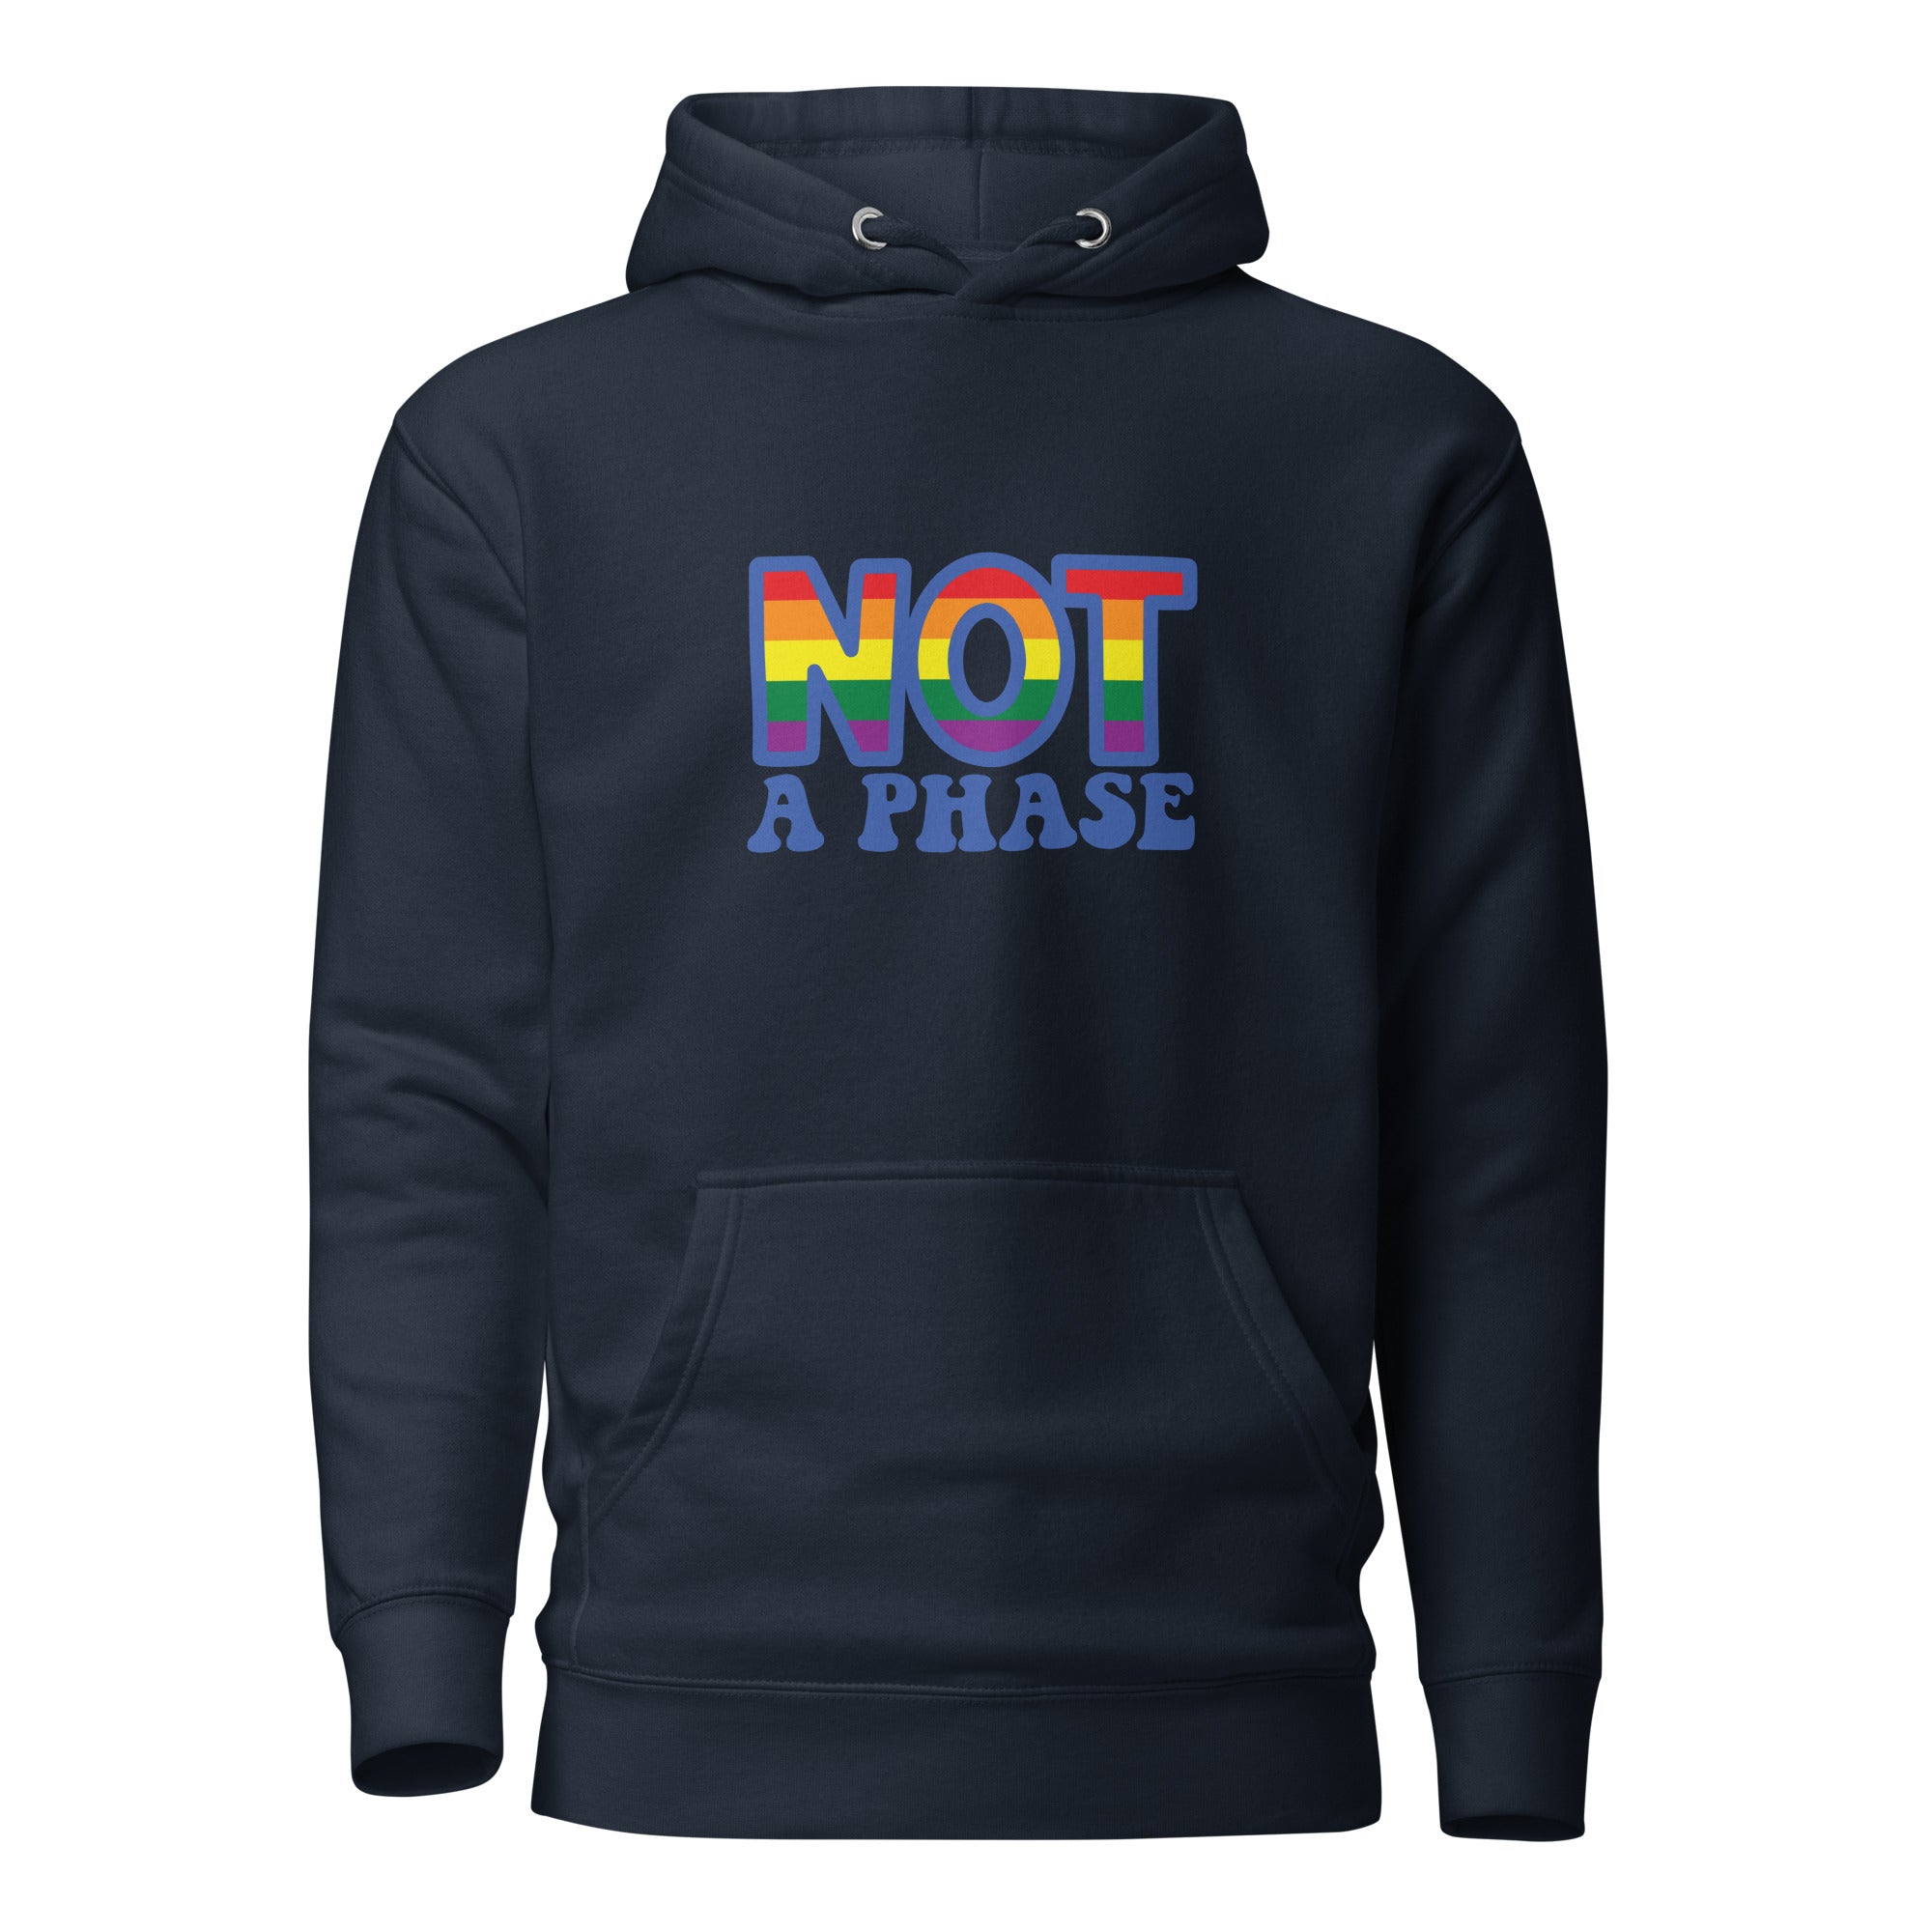 Unisex Hoodie- Not a phase